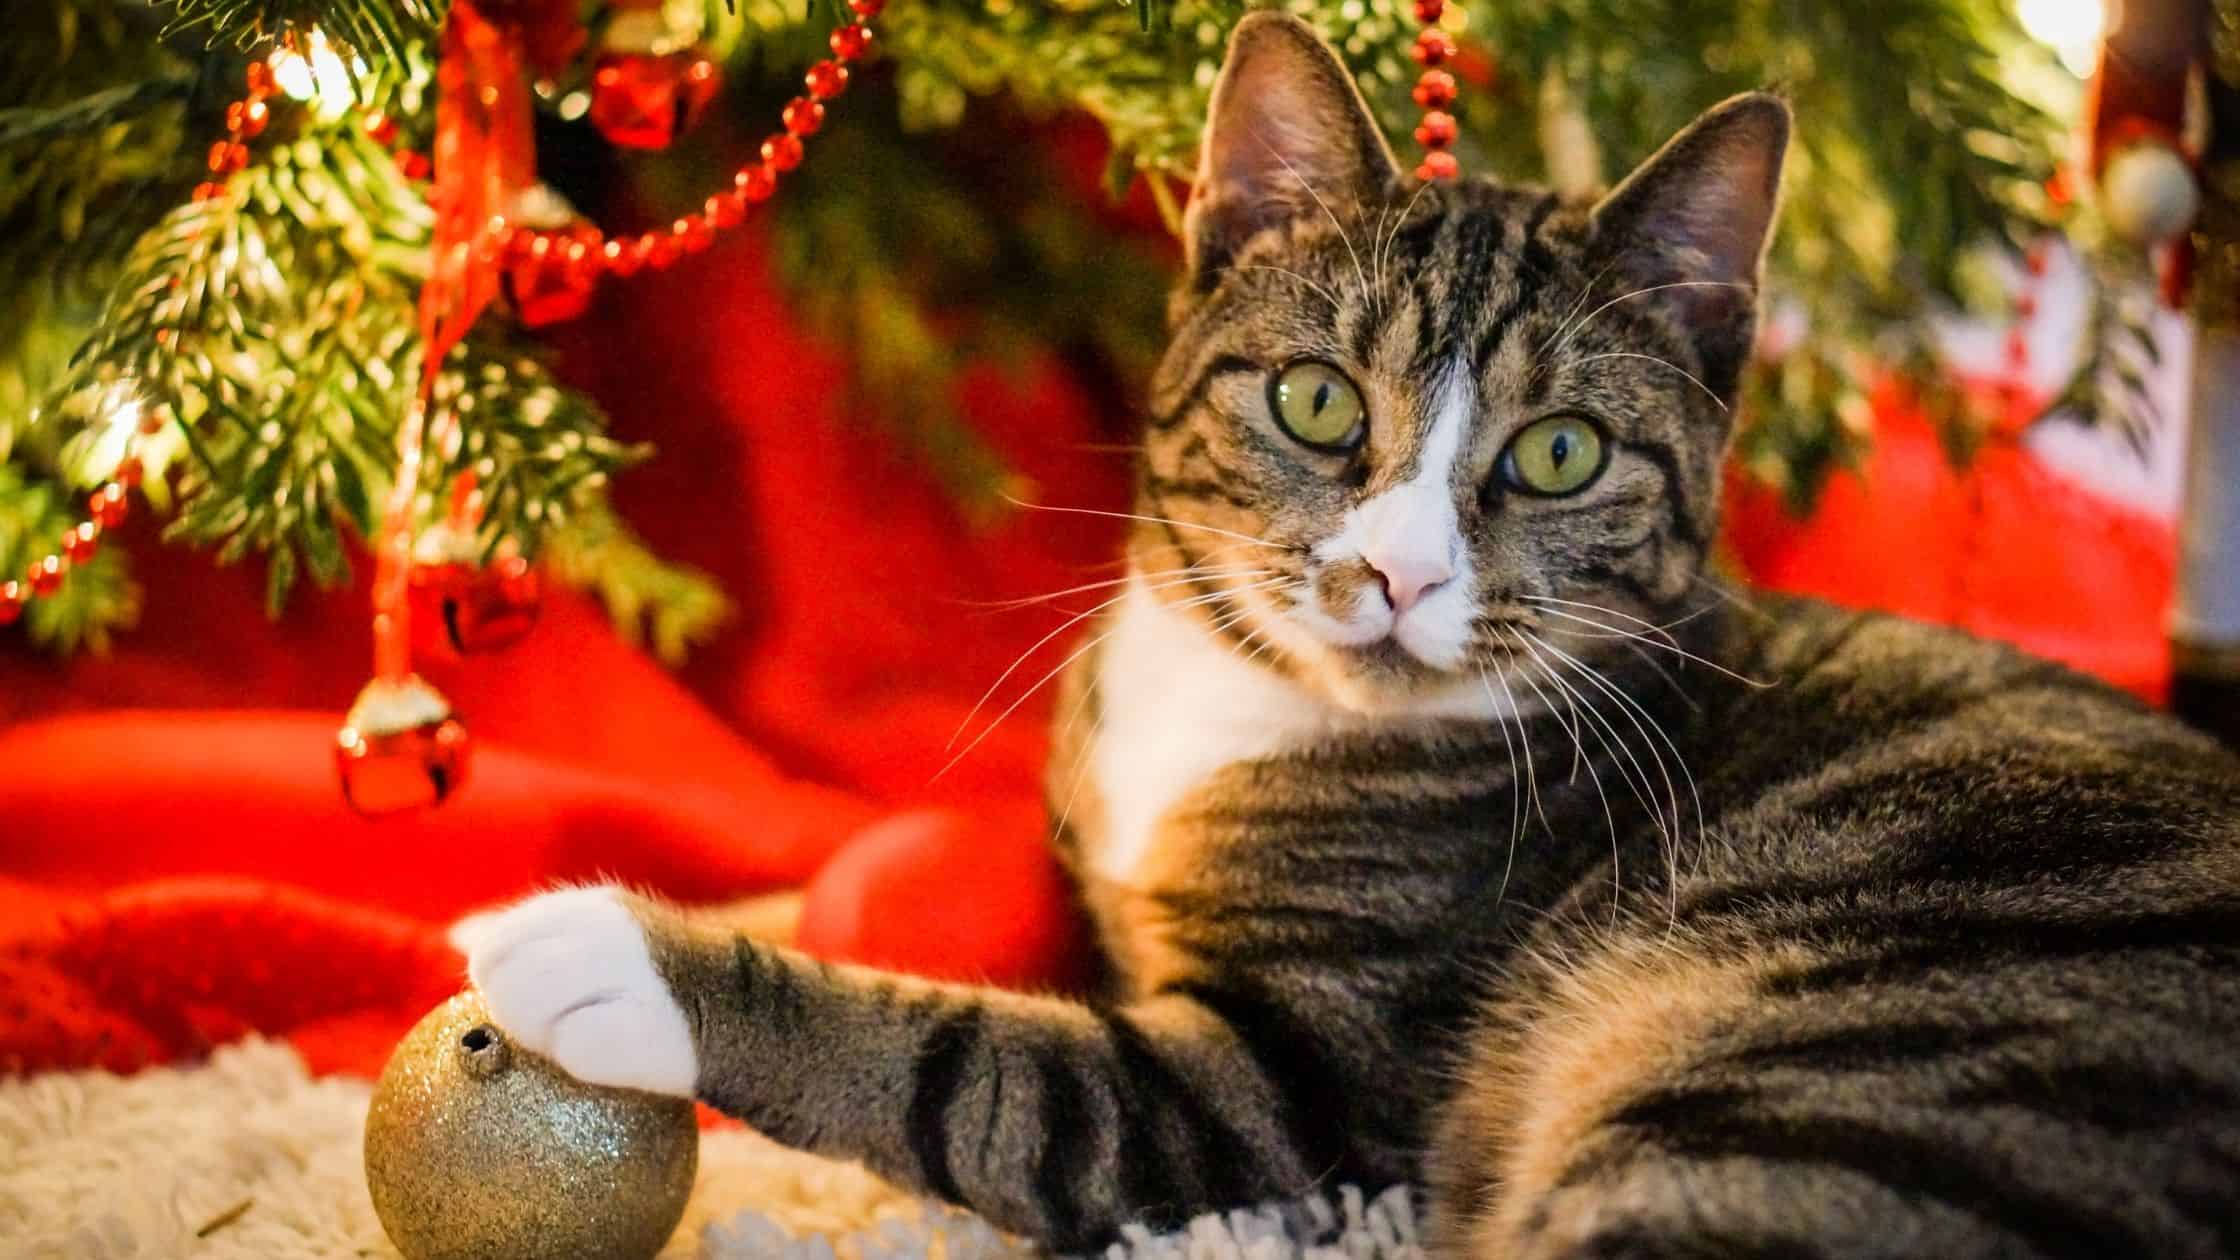 Cat playing with ornament under Christmas tree